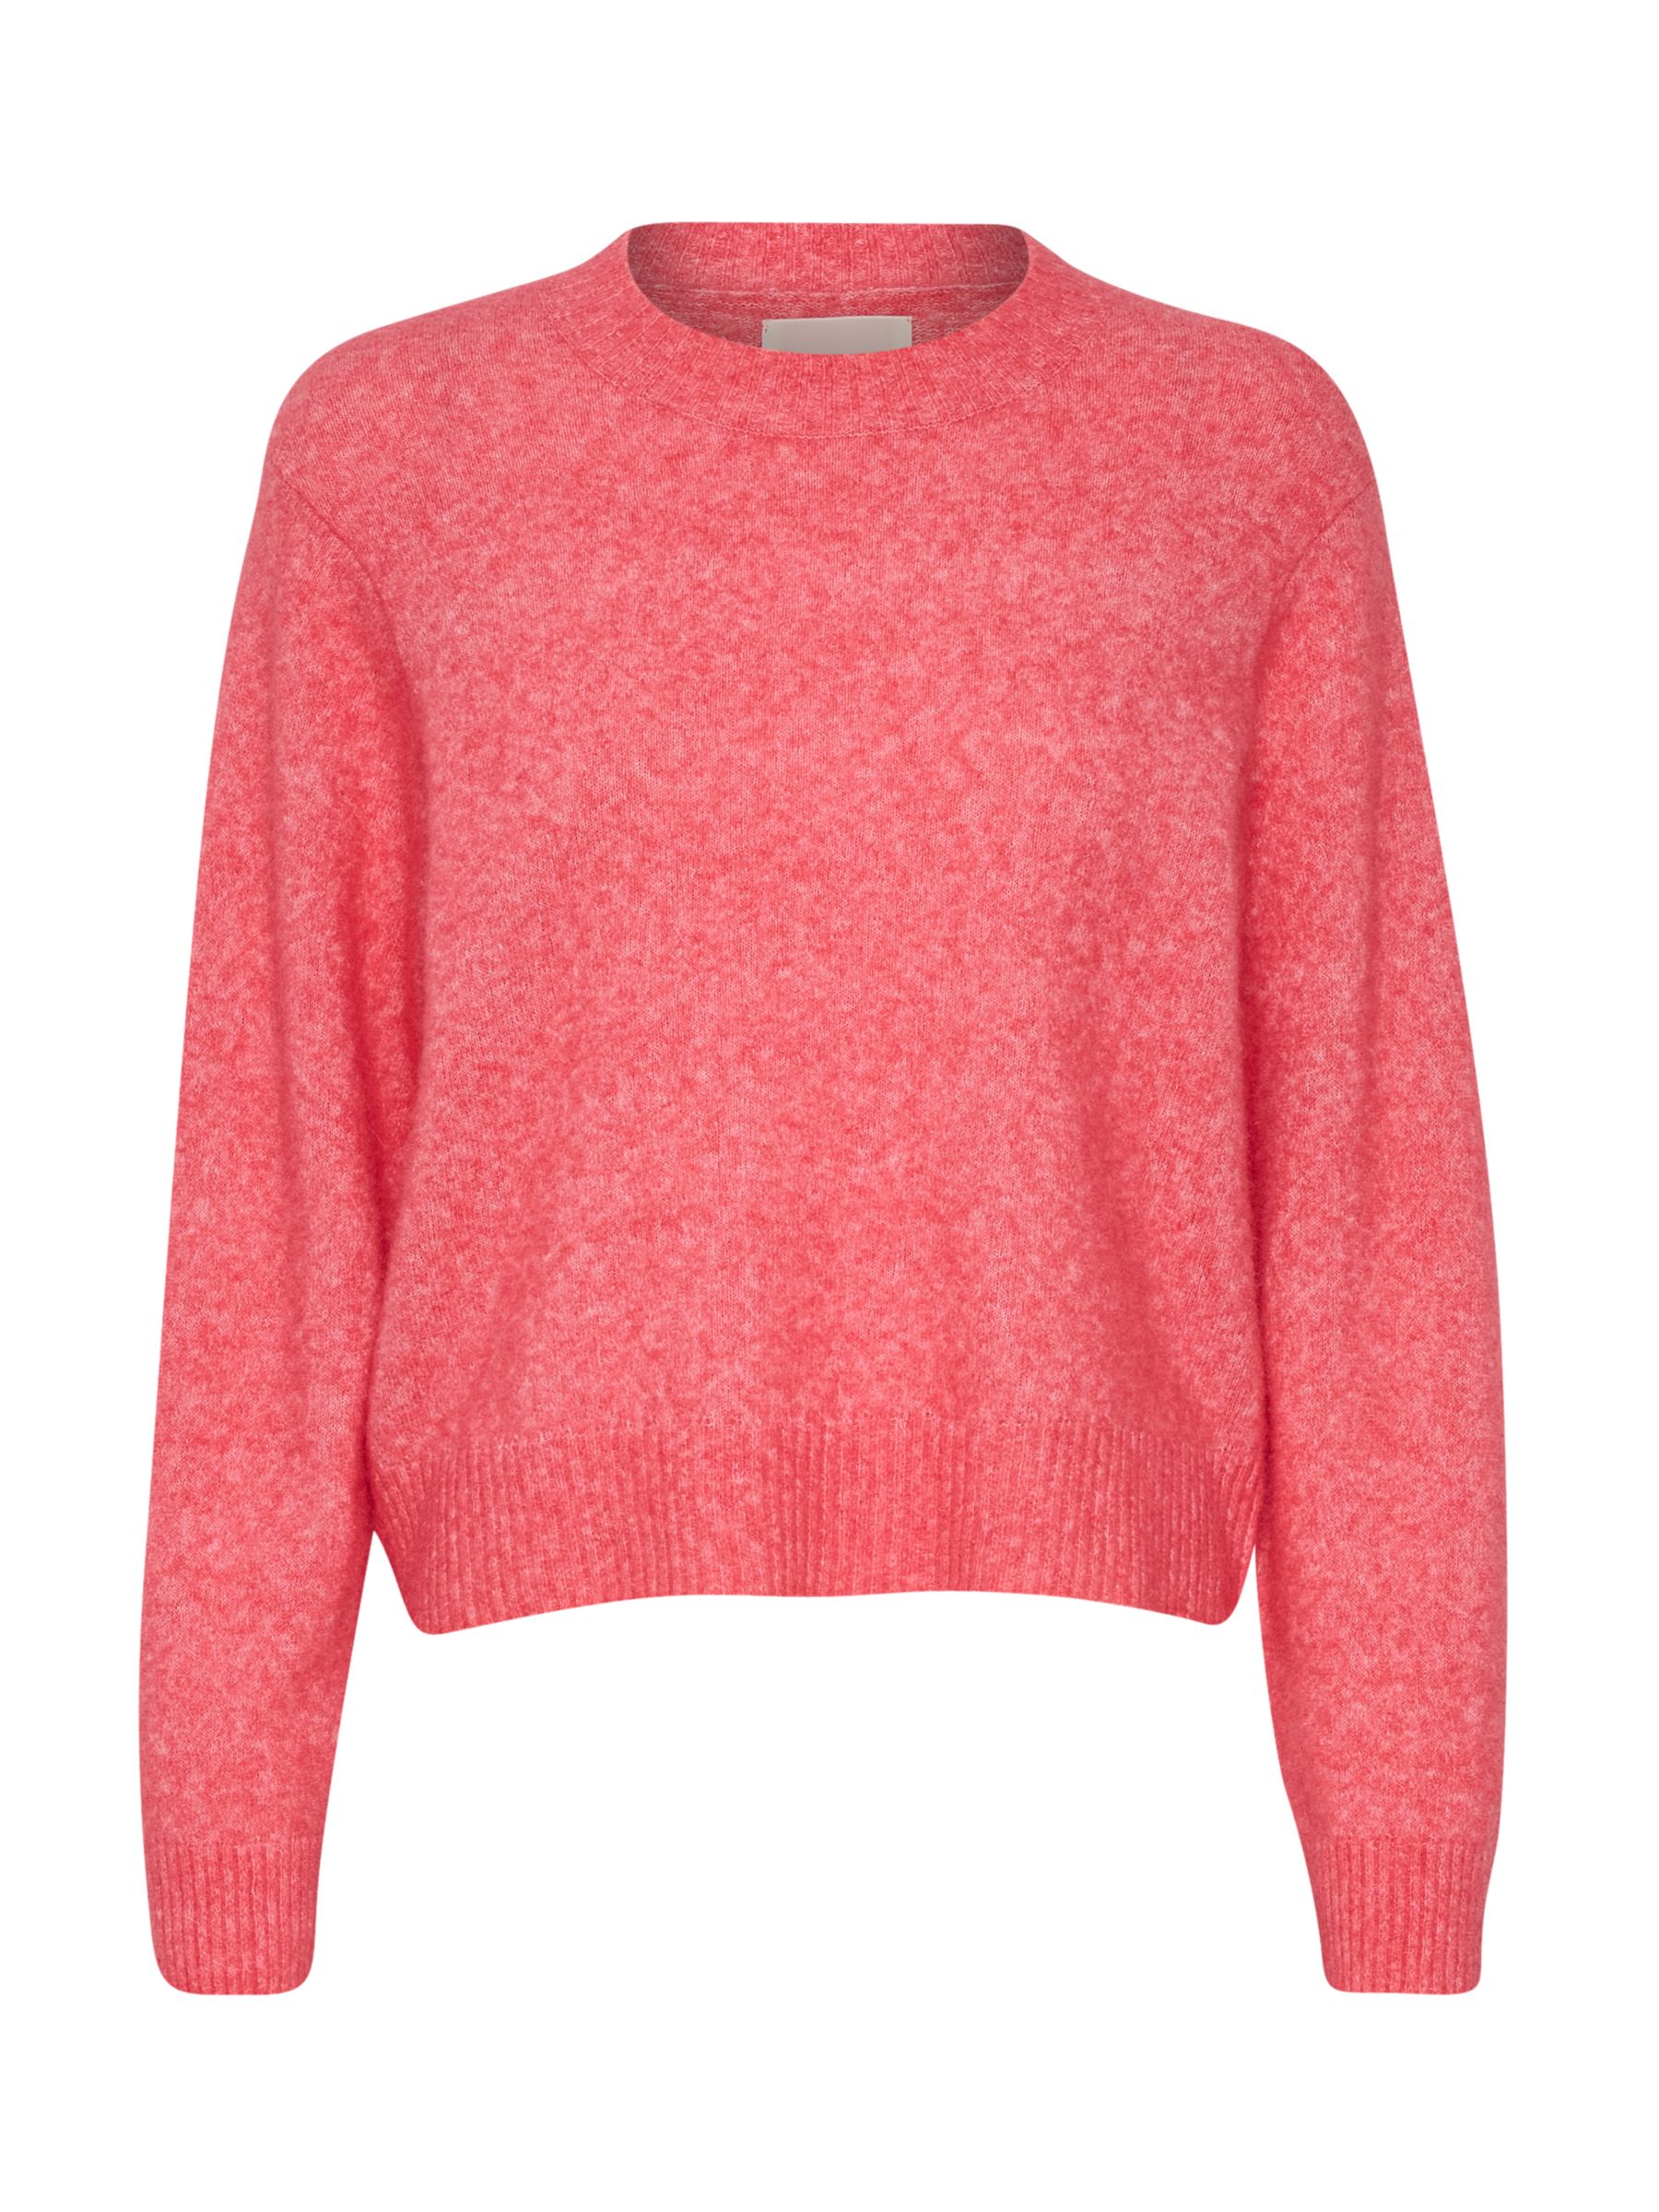 Part Two Cila Wool Blend Jumper, Calypso Coral at John Lewis & Partners